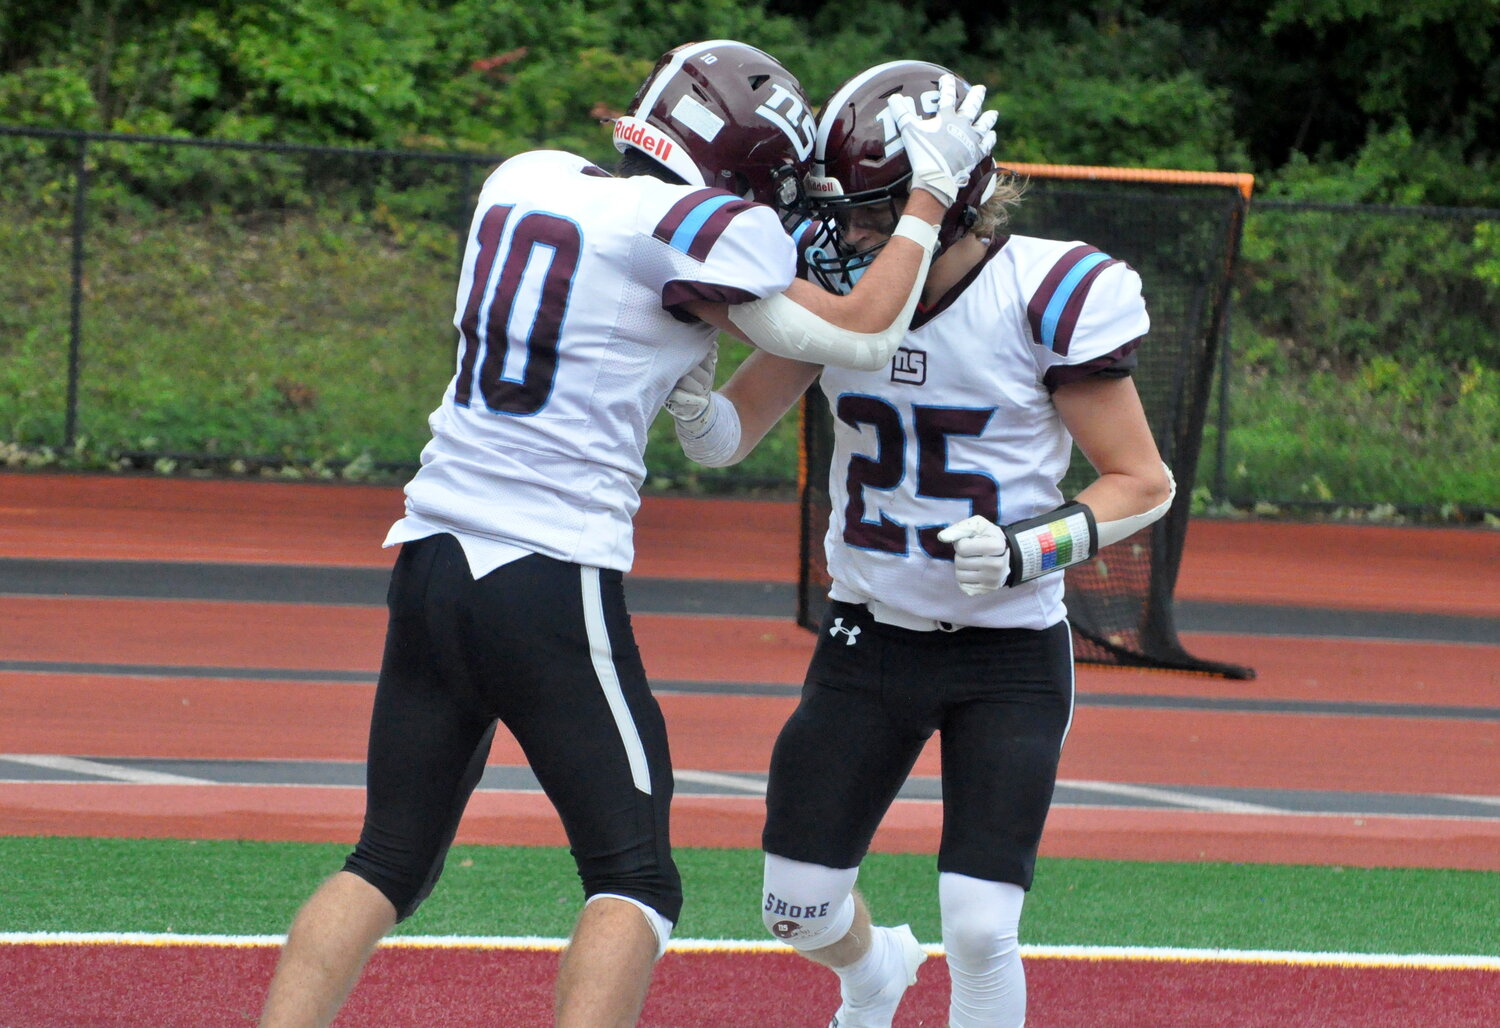 North Shore's Gianlucca Sferrazza, right, and John Haff celebrated the first of Sferrazza's three touchdowns in Saturday's win over East Rockaway.